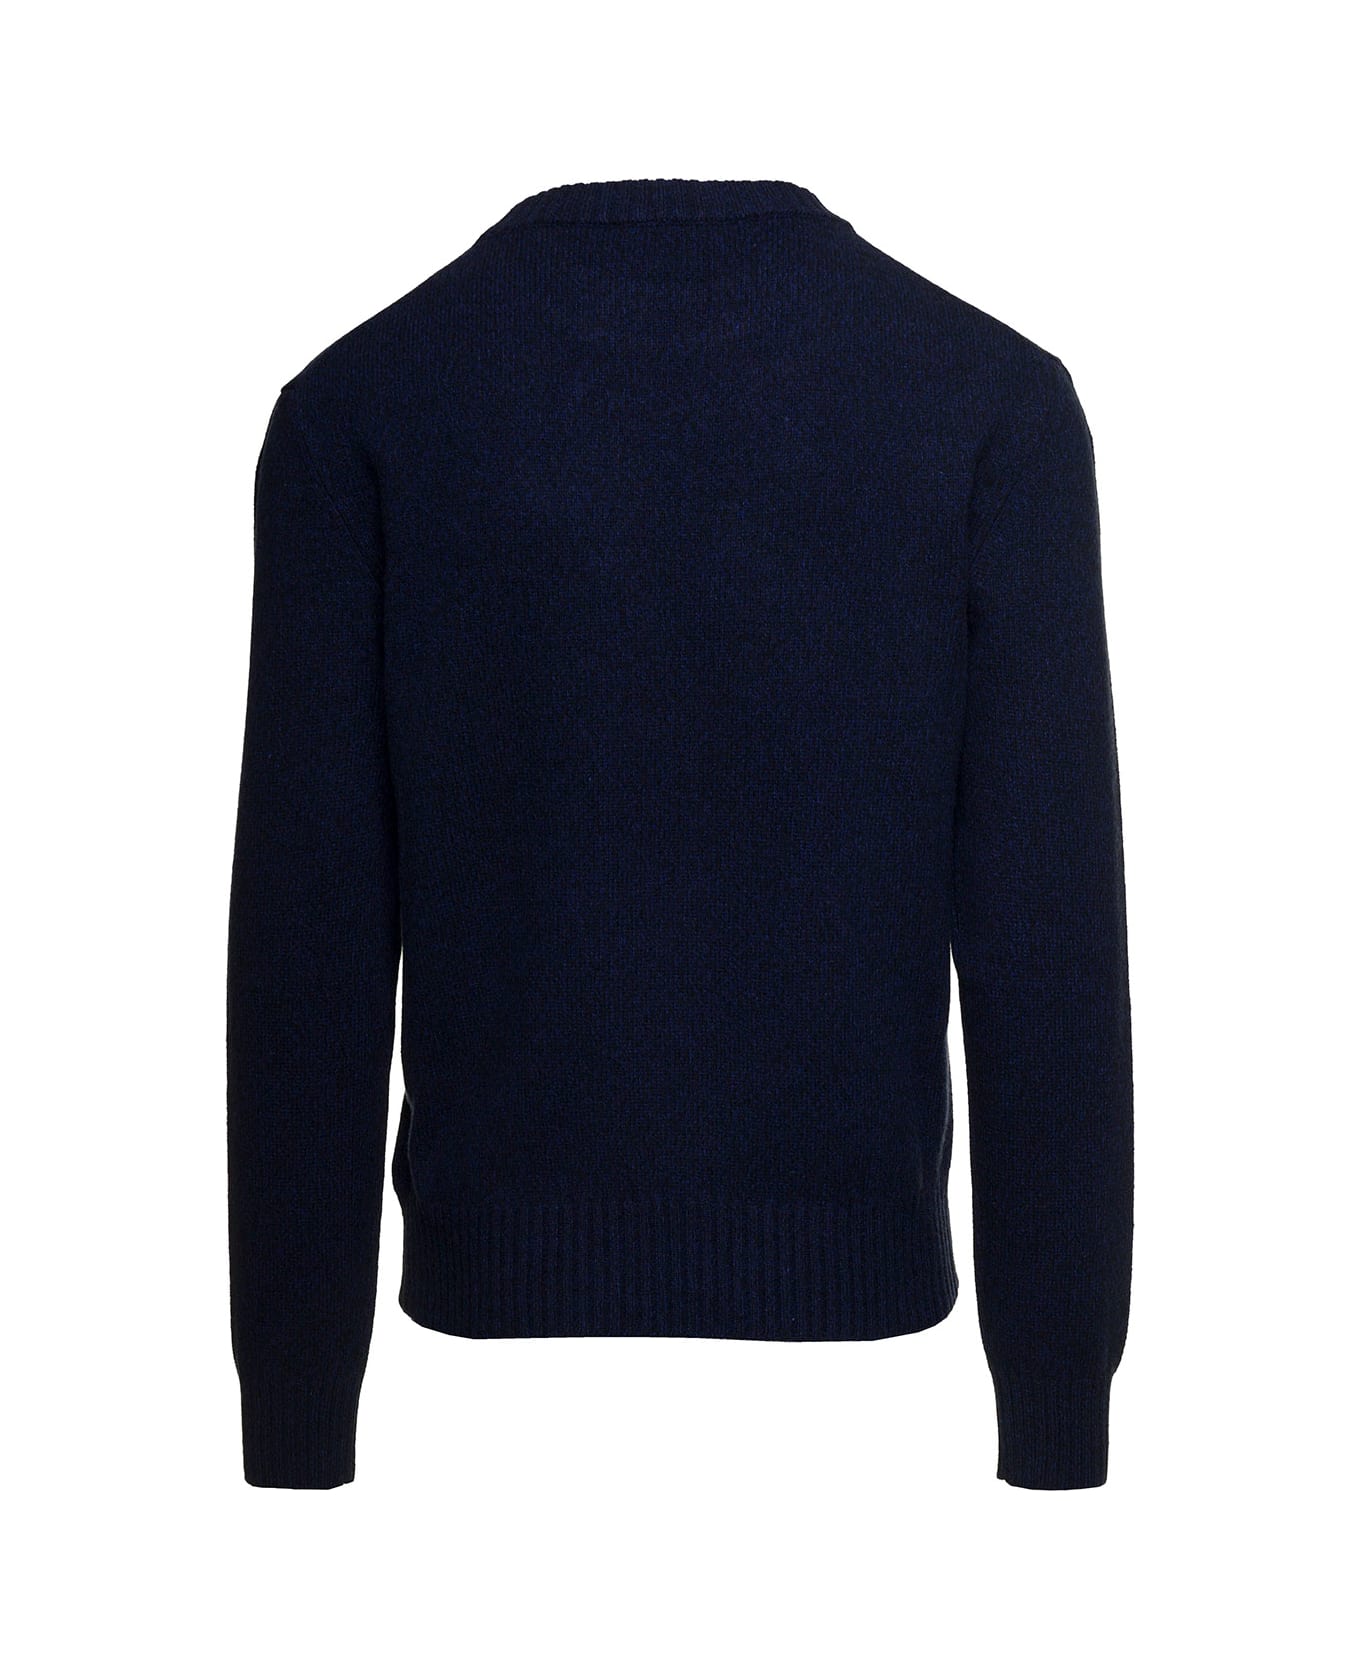 Ami Alexandre Mattiussi Blue Crewneck Sweater With Ribbed Trim In Cashmere And Wool Man - Blu